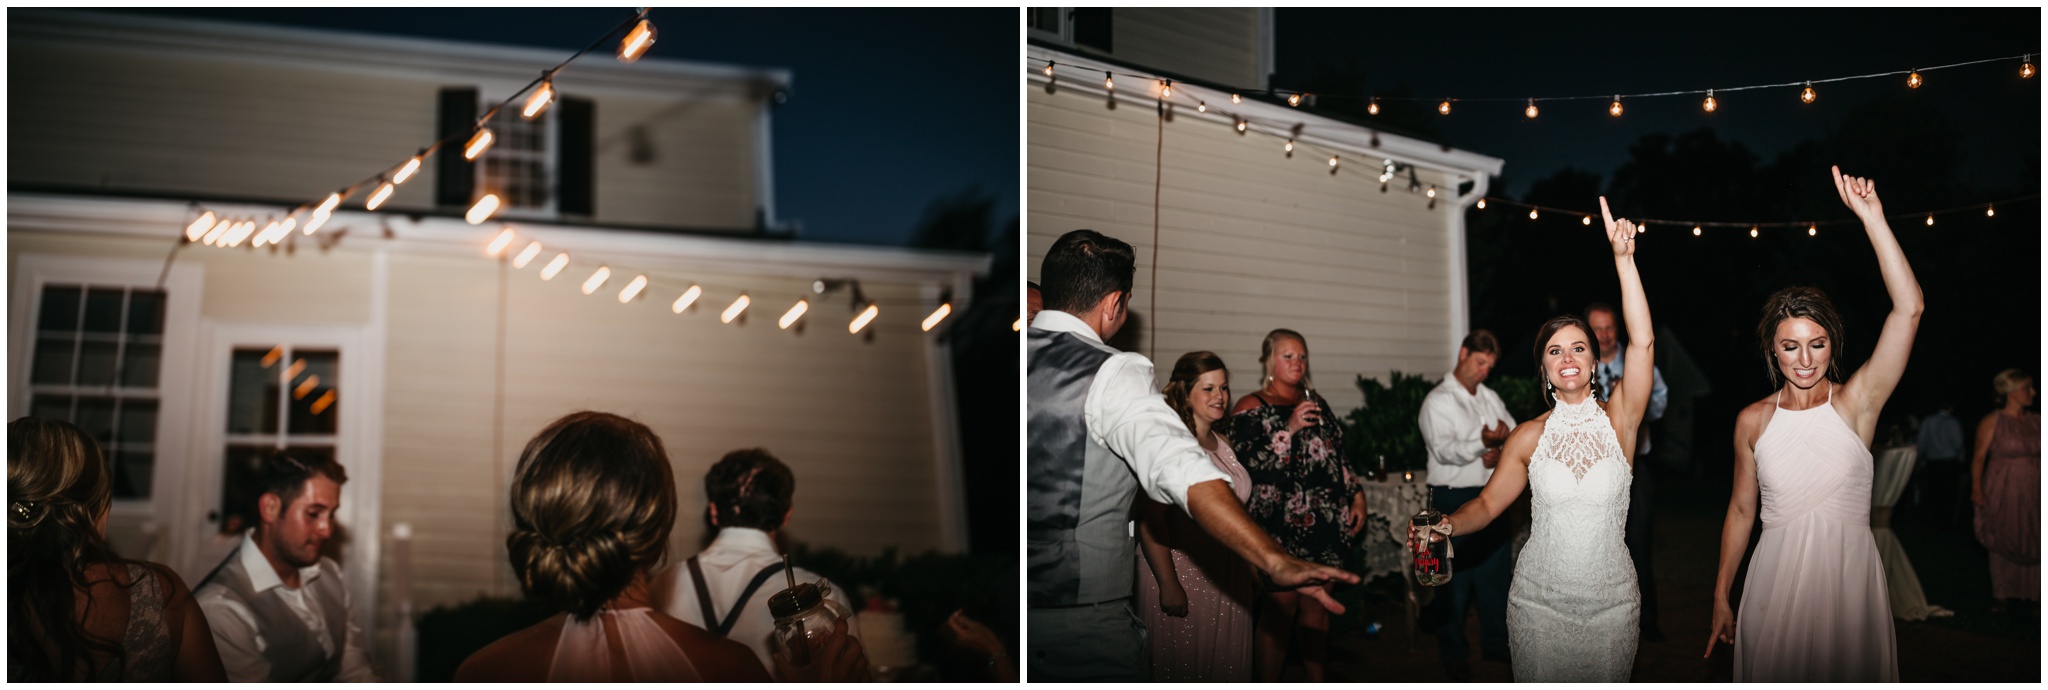 The Morros Photography Chicago Illinois Alex and Caleb Cool Springs House Wedding_0346.jpg